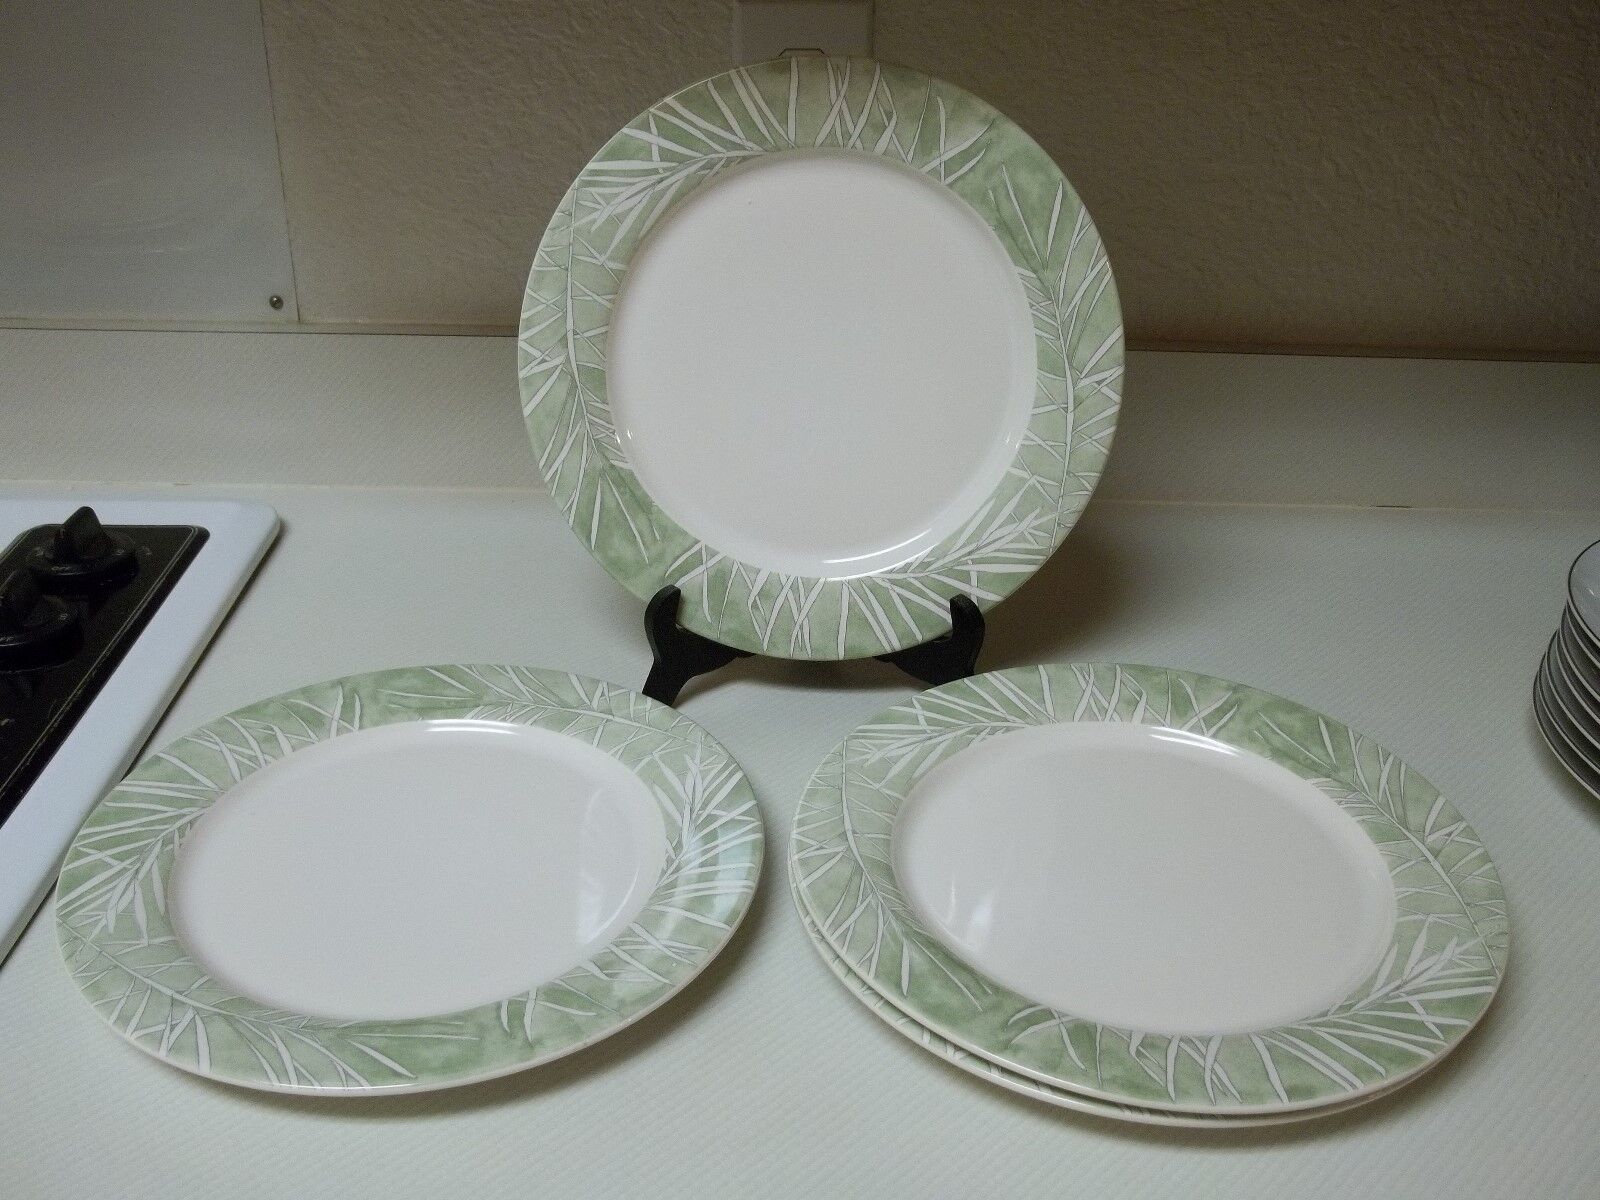 Primary image for Pfaltzgraff Stoneware ~ Set of 4 Dinner Plates Leaf Pattern 11 Inch